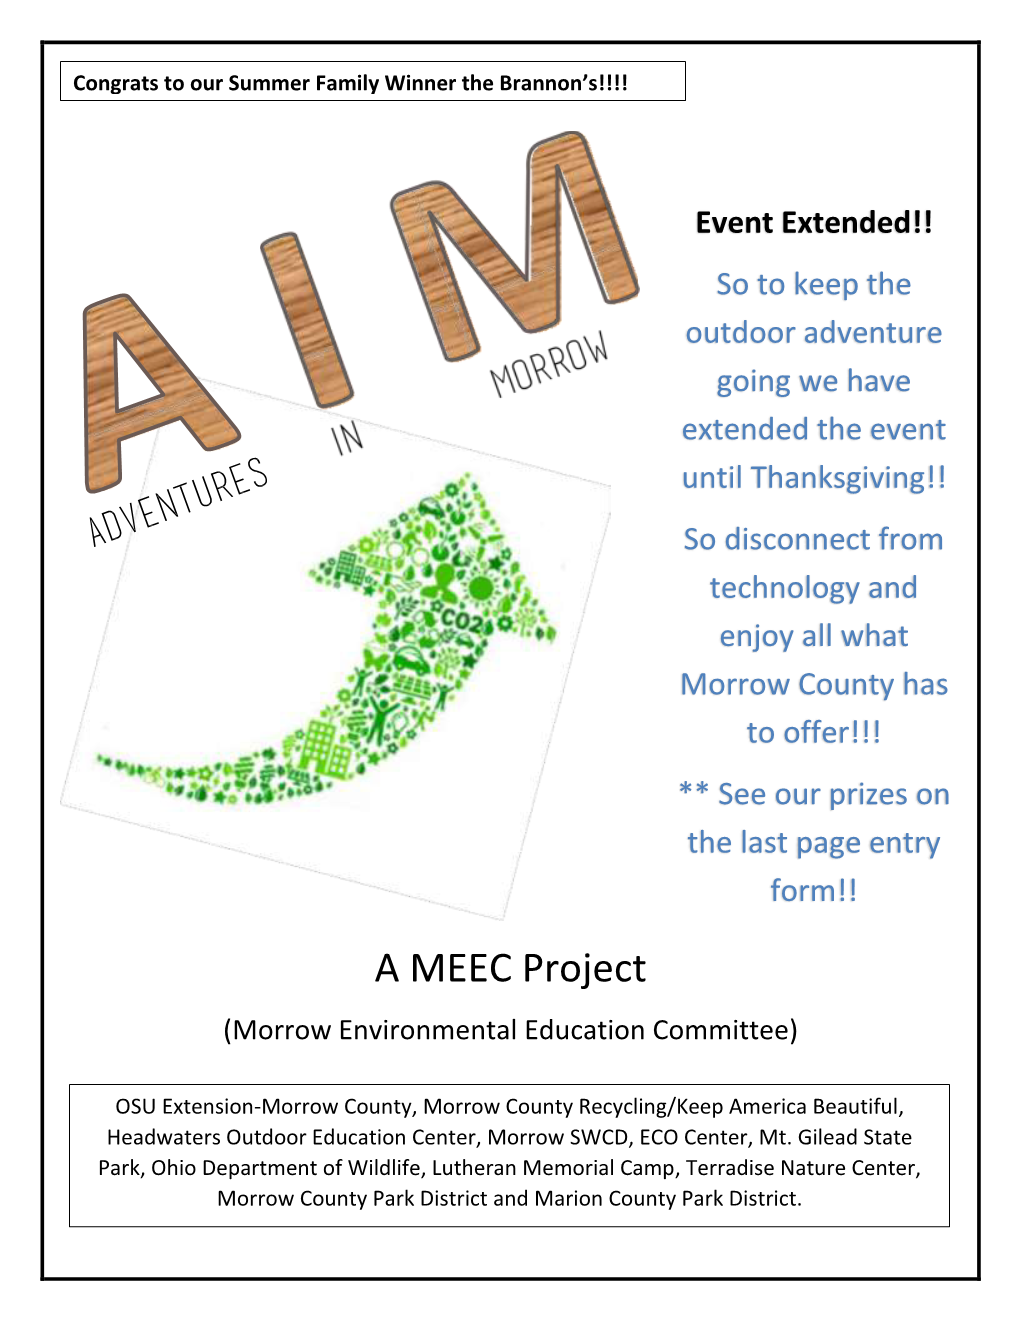 A MEEC Project (Morrow Environmental Education Committee)